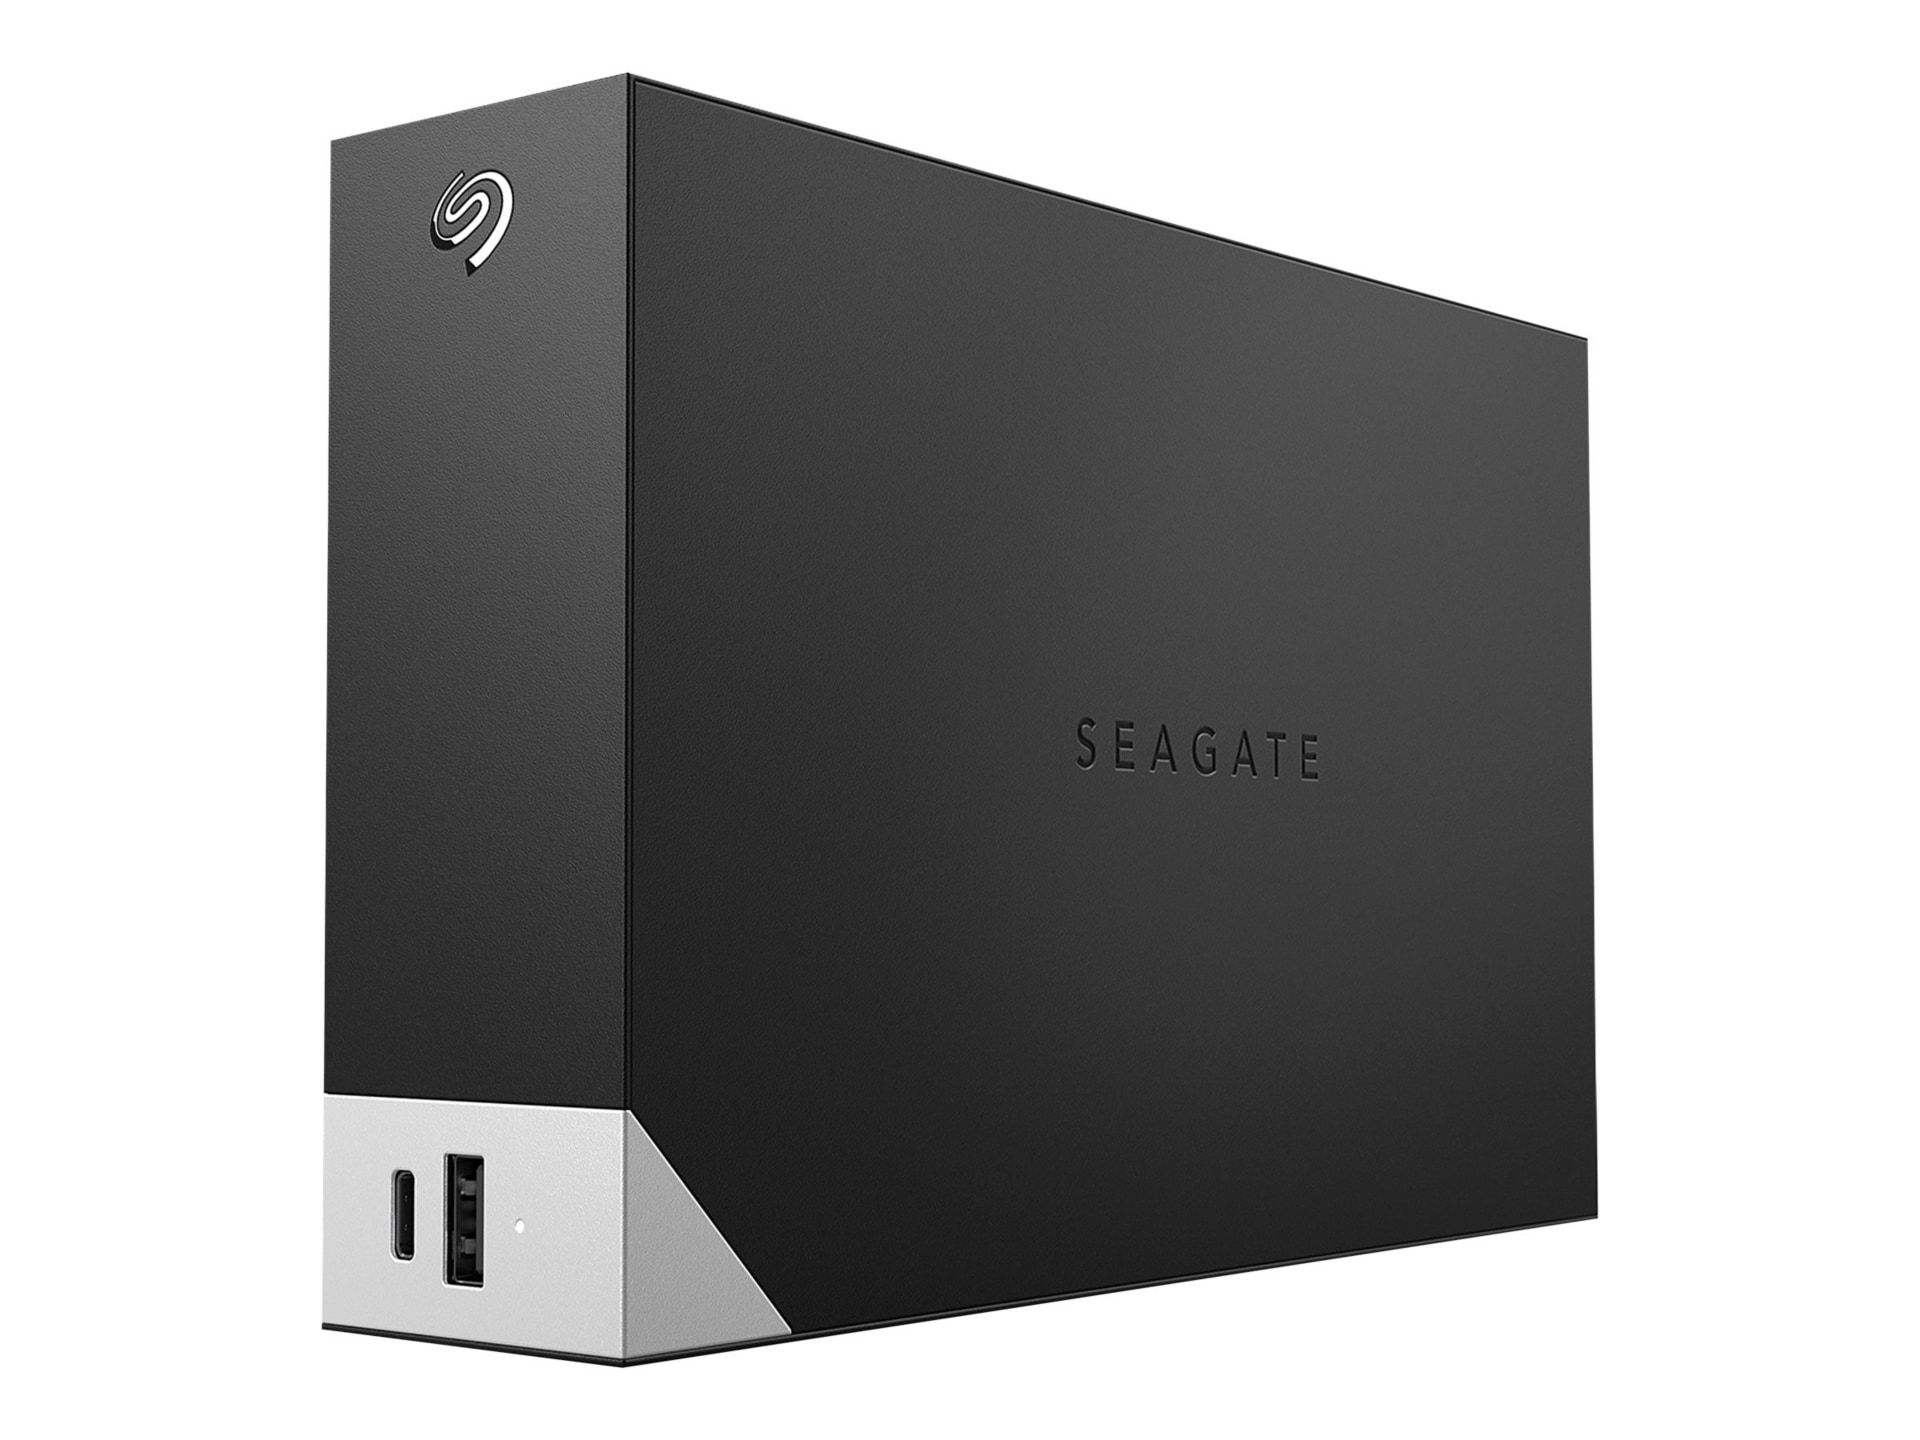 Seagate One Touch with hub STLC6000400 - hard drive - 6 TB - USB 3.0